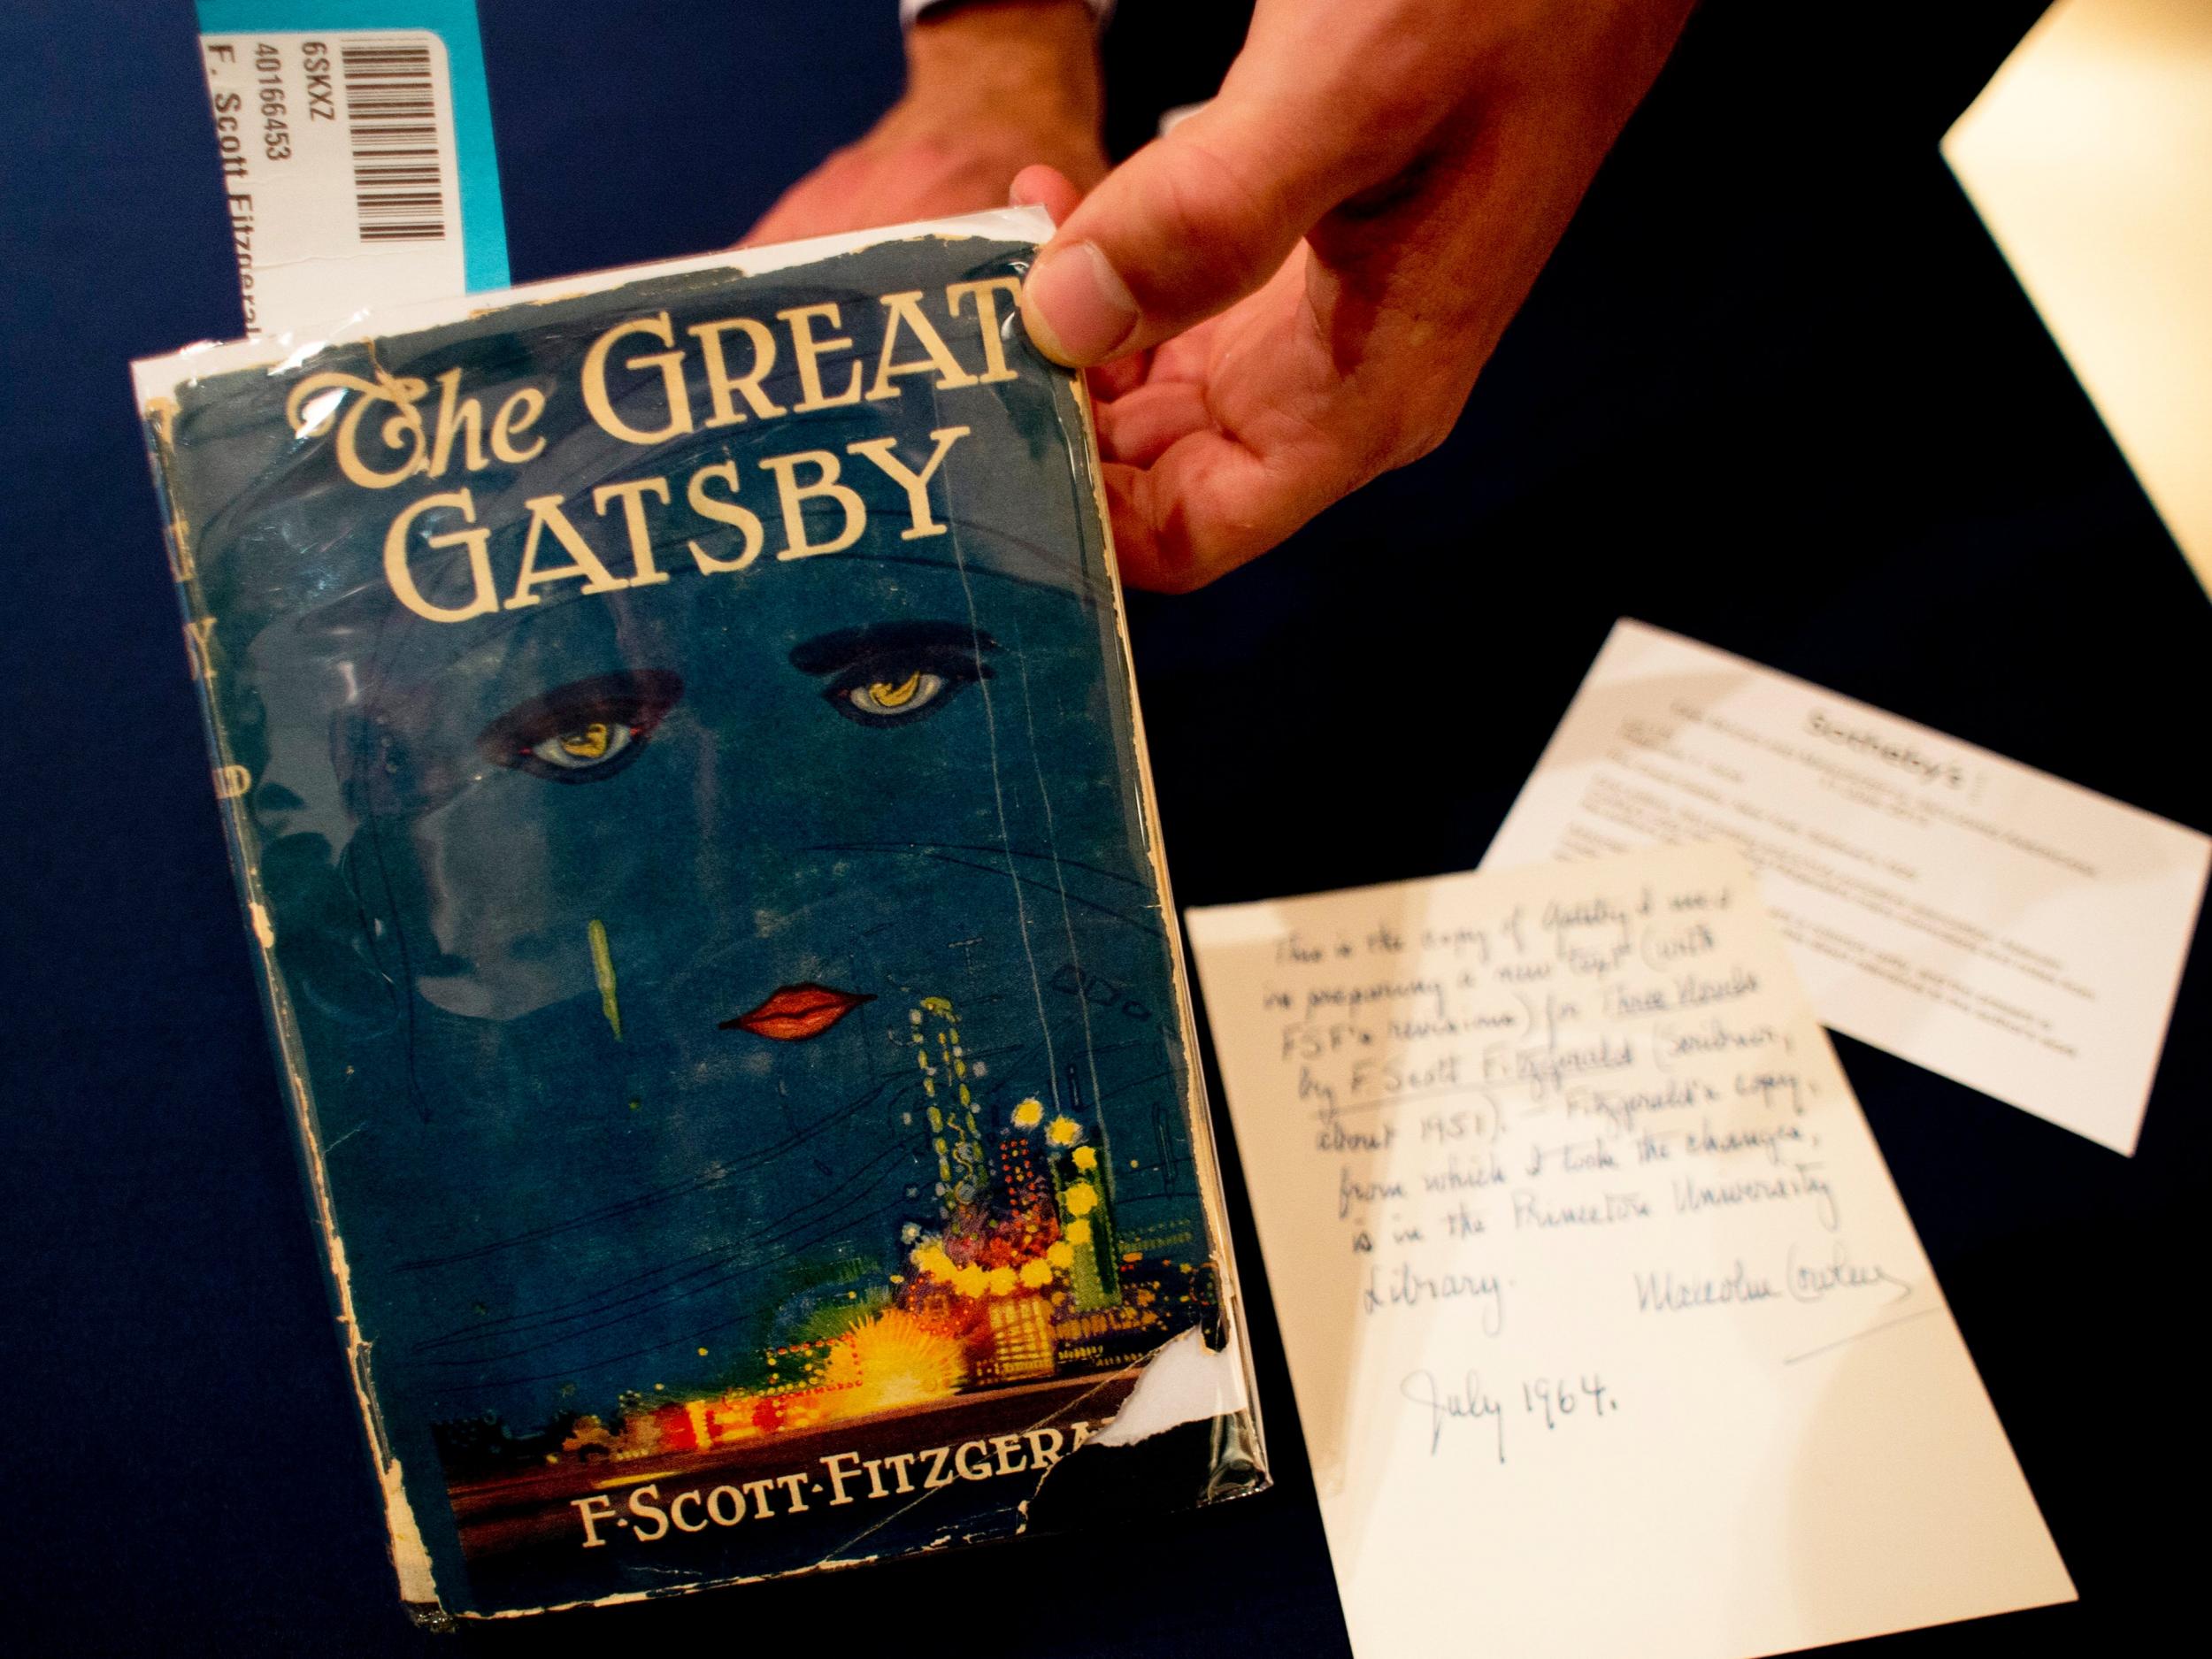 A first edition of ‘The Great Gatsby’ at Sotheby’s in New York, 2013, sold for $112,500